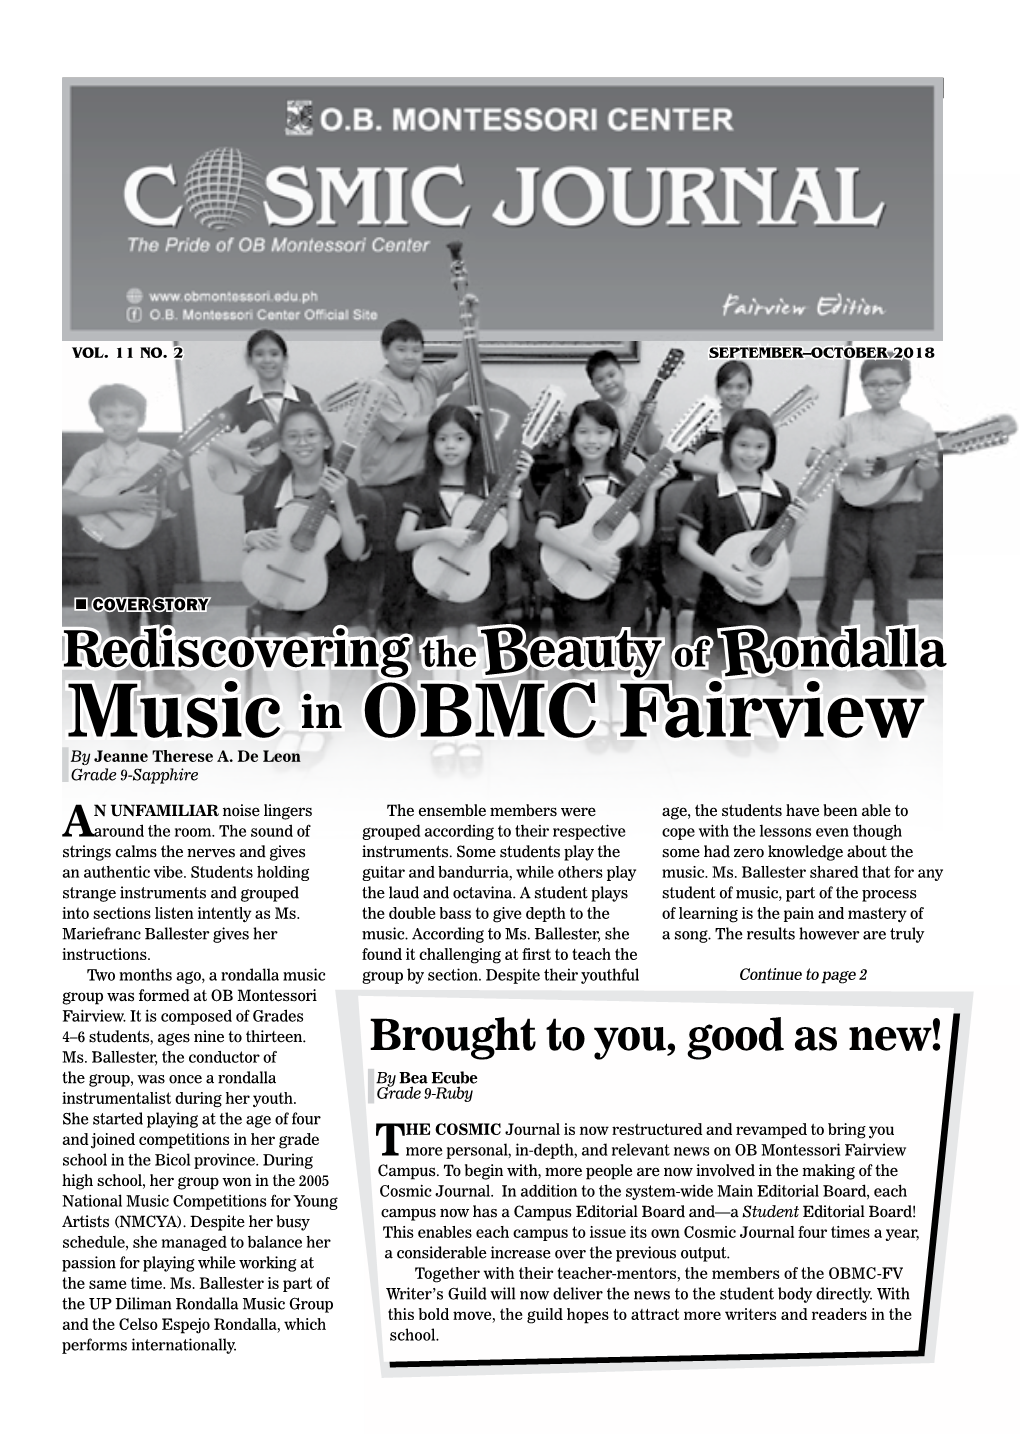 Music in OBMC Fairview by Jeanne Therese A